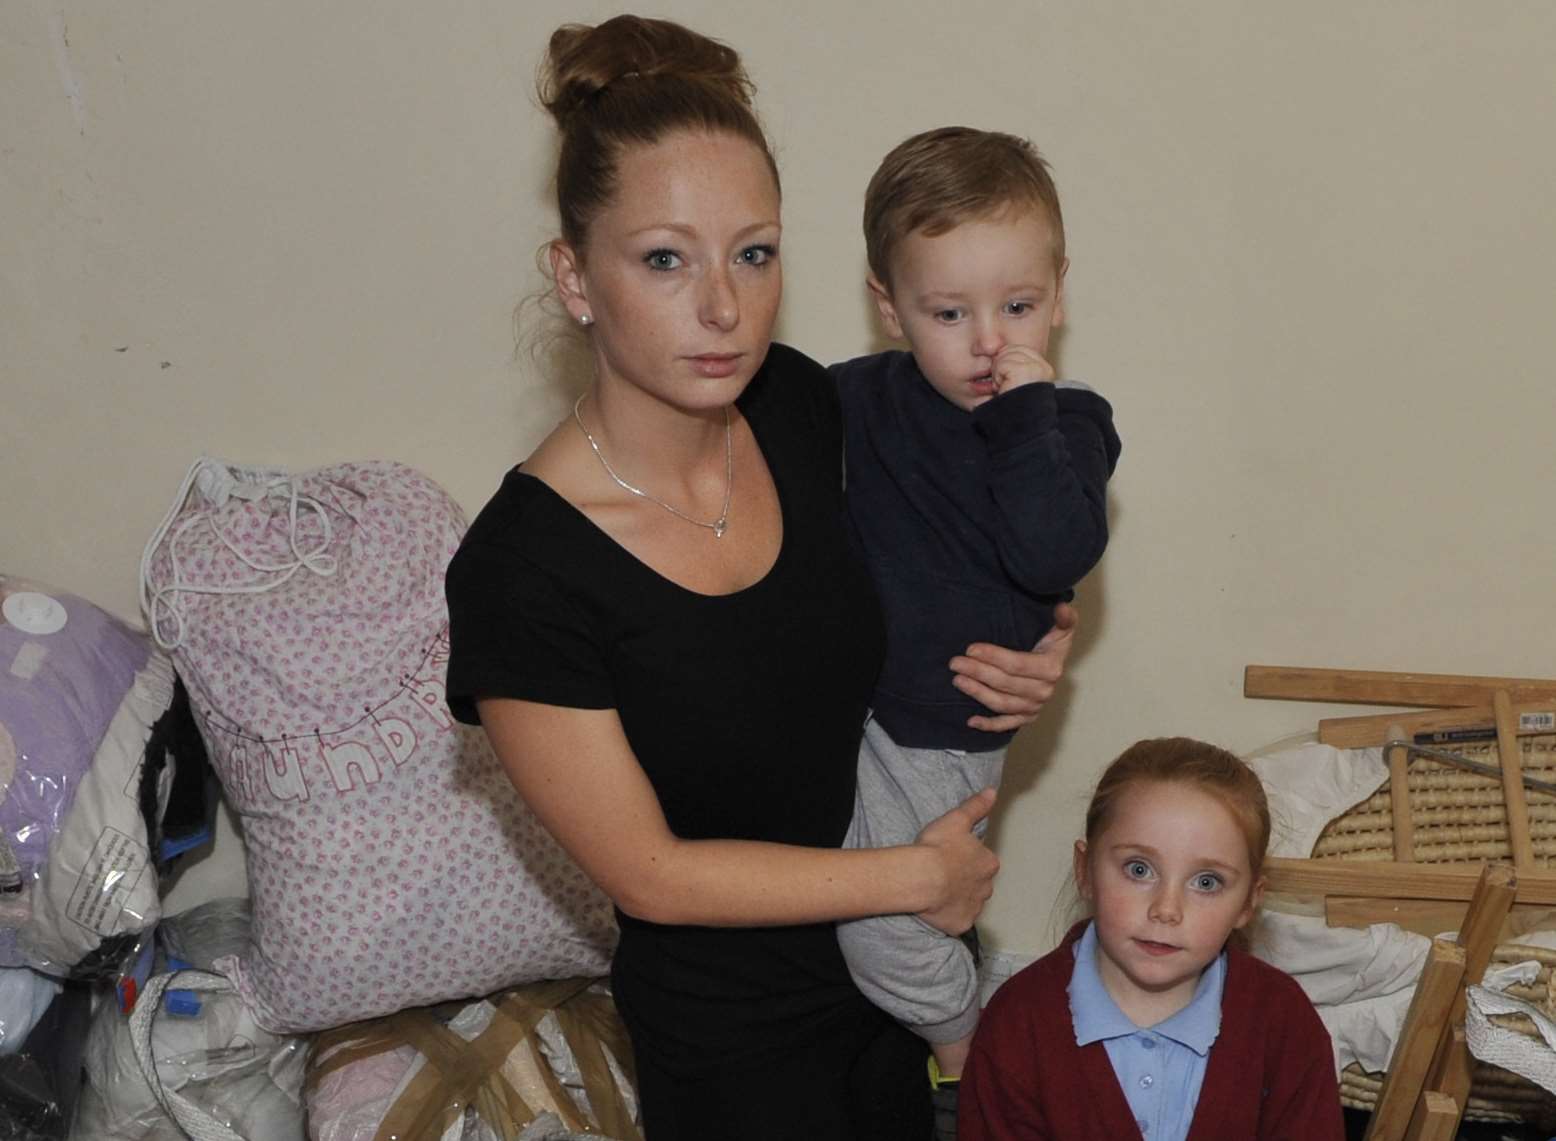 Mother Emily Shephard fears of becoming homeless after eviction, seen here with, Lily aged five and Cooper aged two